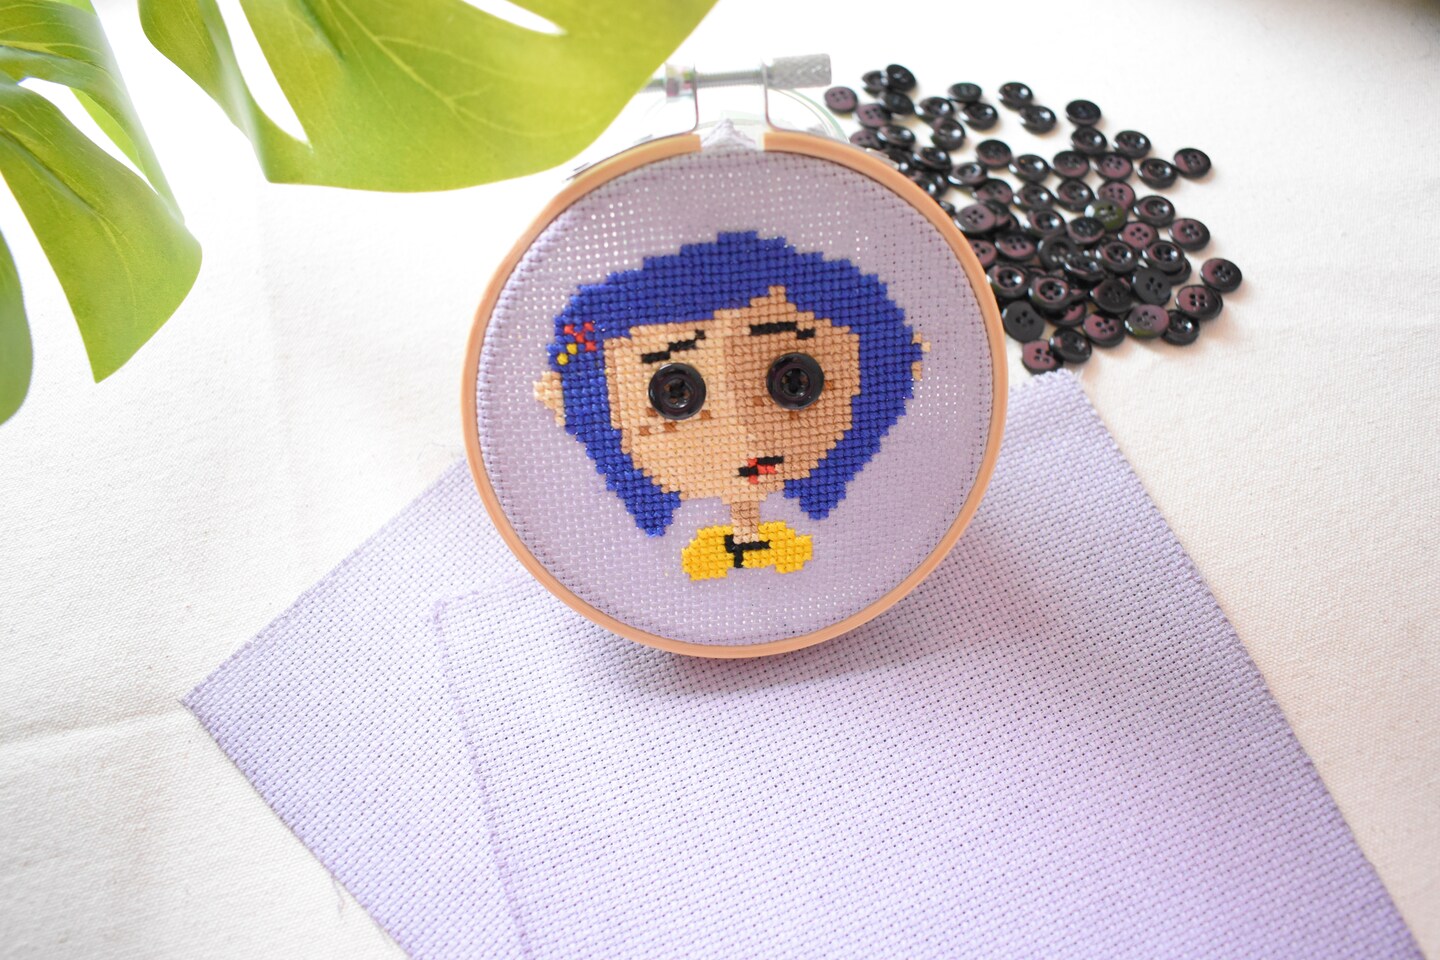 Beginner Friendly Fun Needle Craft Kit-Coraline with Button on it